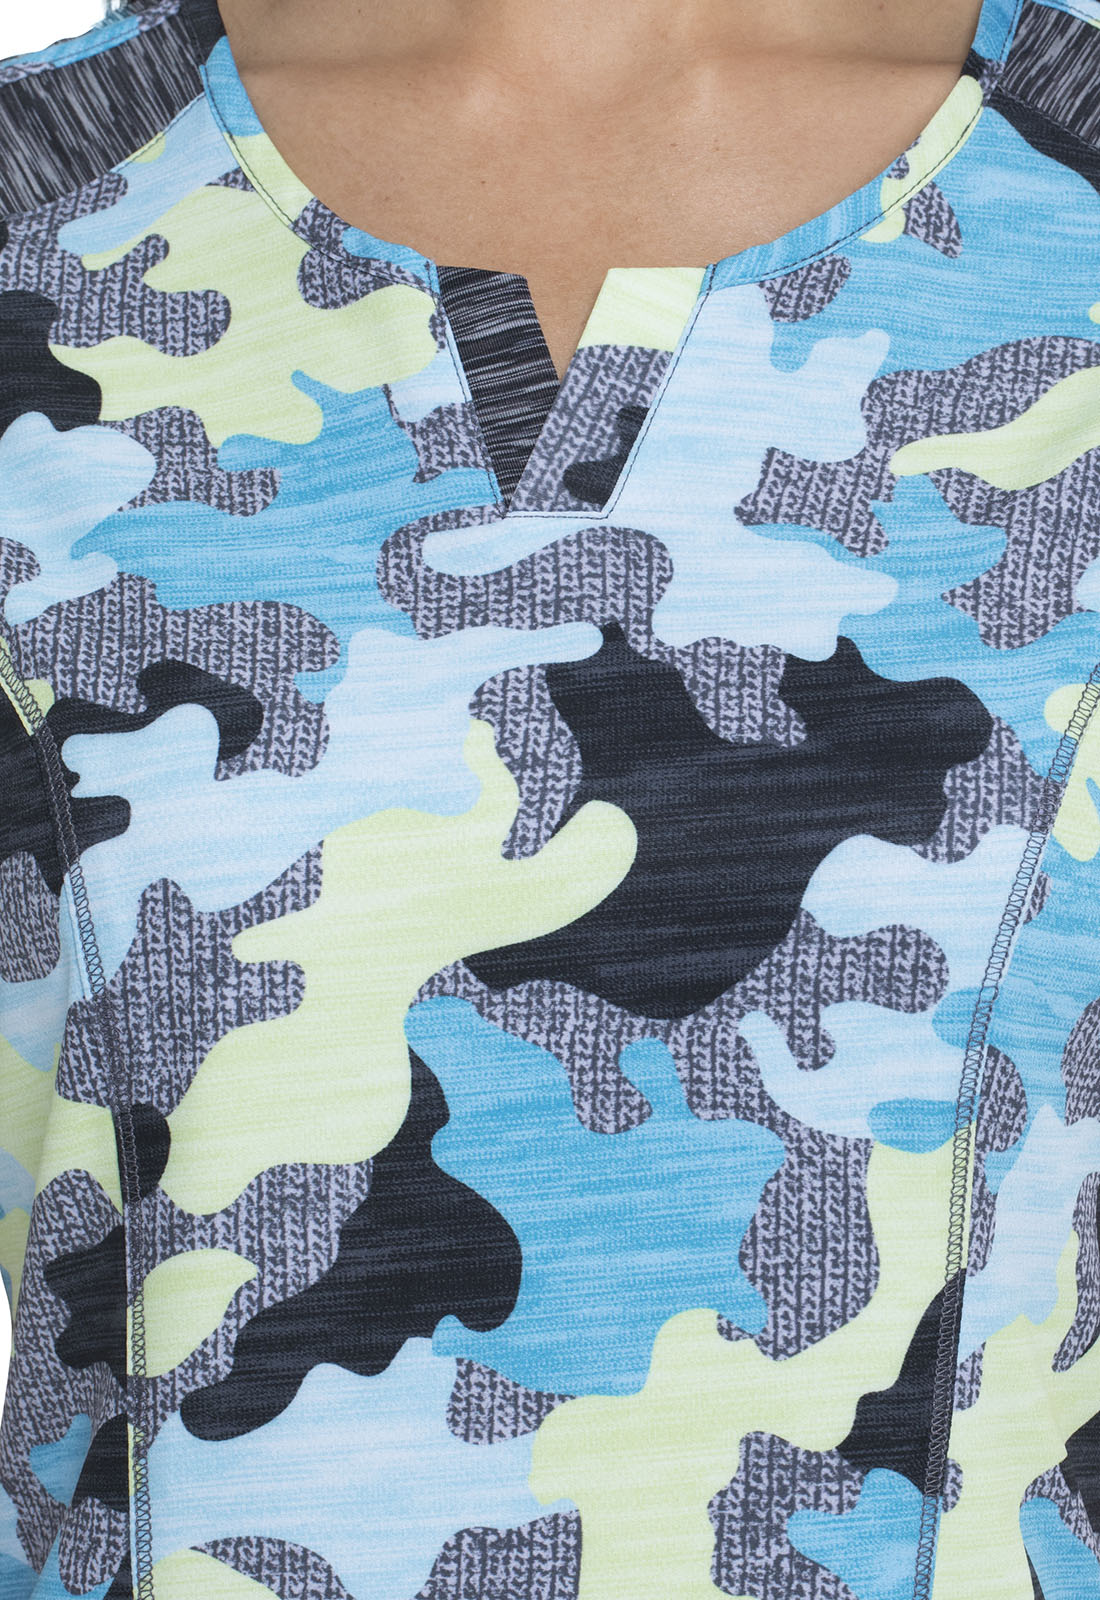 Dickies Dynamix Shaped V-Neck Top  in Totally Textured Camo